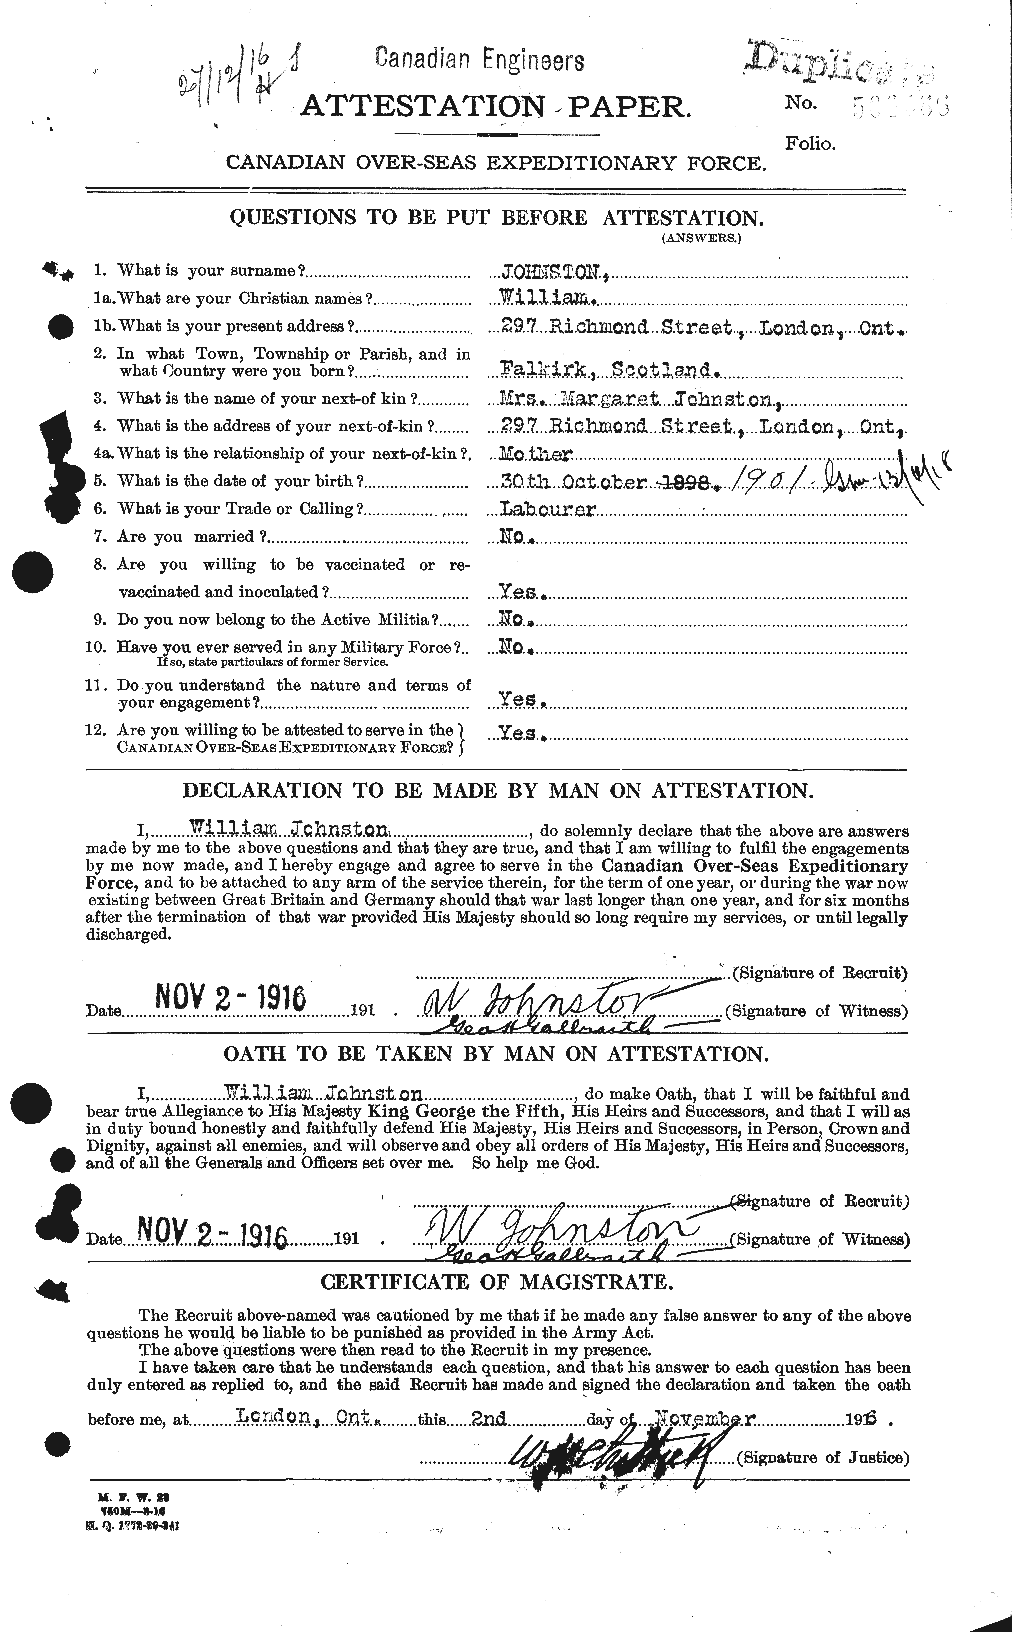 Personnel Records of the First World War - CEF 427288a